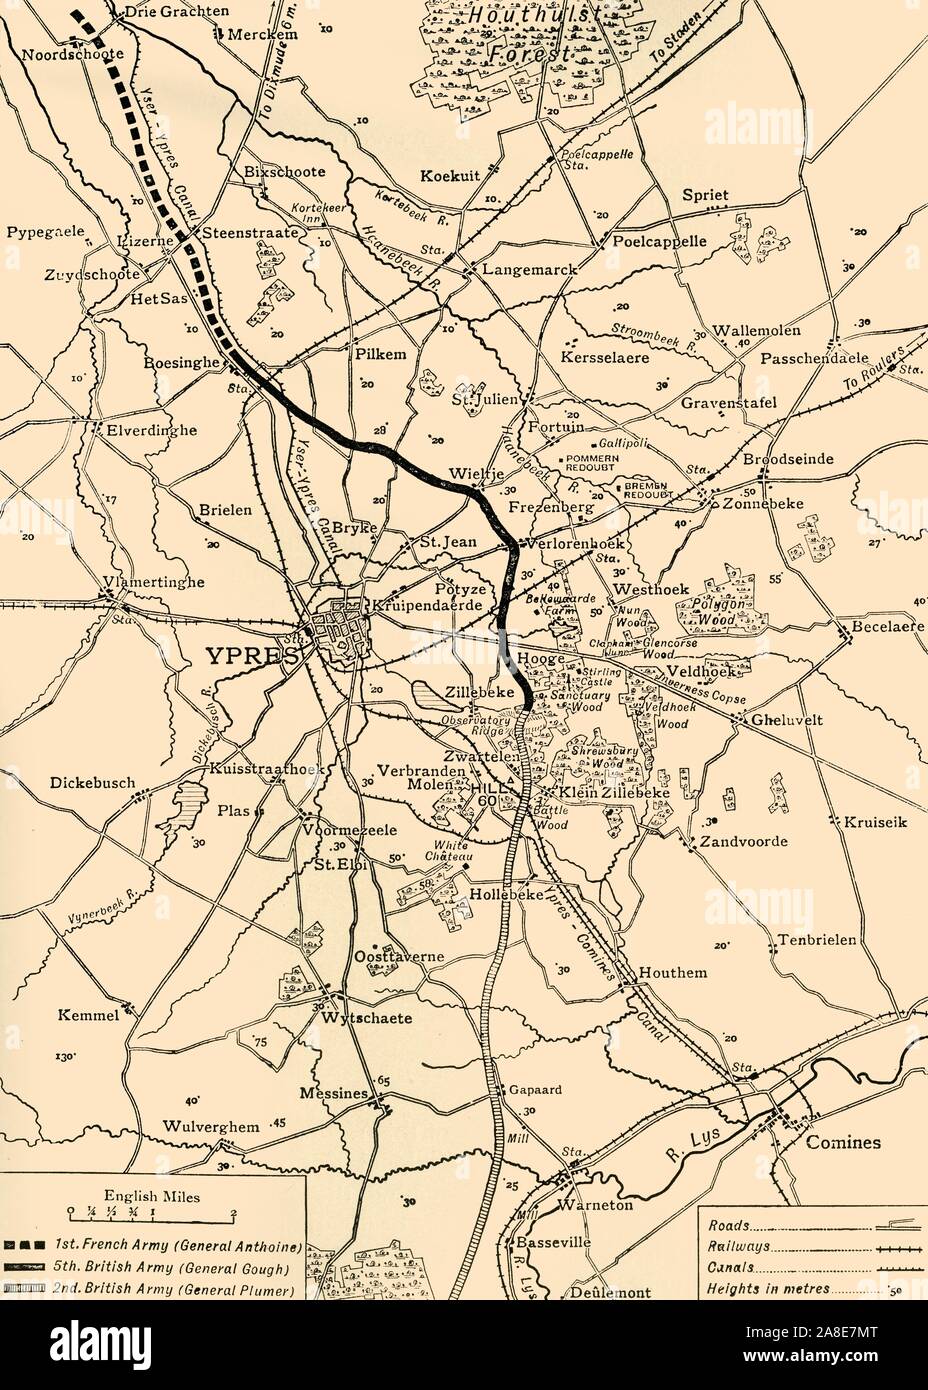 Map of Ypres, West Flanders, Belgium, First World War, (c1920). 'The Ypres Salient before the Battle of July 31, 1917: map showing the approximate positions of the Franco-British Line'. The Third Battle of Ypres, also known as the Battle of Passchendaele, took place on the Western Front from July to November 1917. It was fought between the British, Belgian and French armies against the Germans, and resulted in the deaths of hundreds of thousands of men. From &quot;The Great World War: A History&quot;, Volume VII, edited by Frank A Mumby. [The Gresham Publishing Company Ltd, London, c1920] Stock Photo